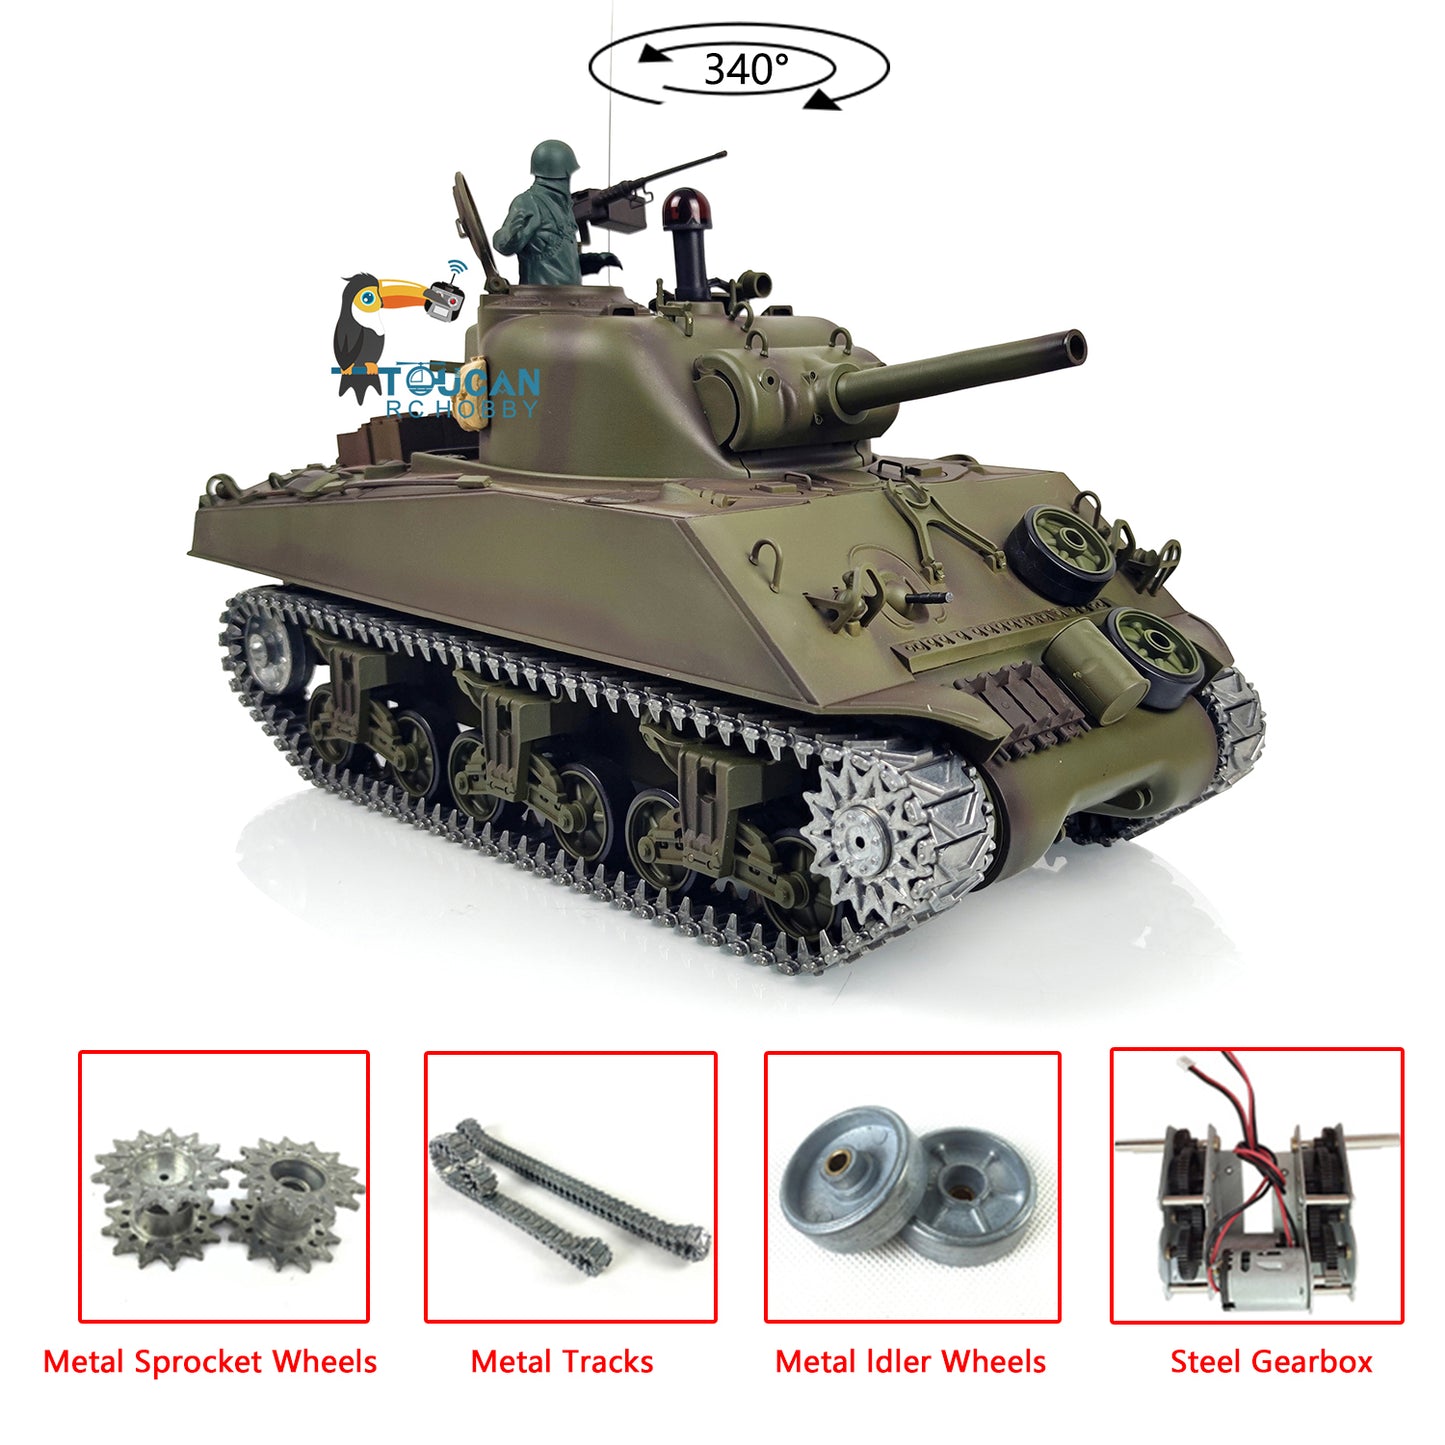 US STOCK Henglong 1/16 Scale 7.0 Upgraded USA M4A3 Sherman RTR RC Tank 3898 Metal Tracks 340 Degree Turret 2.4Ghz Model